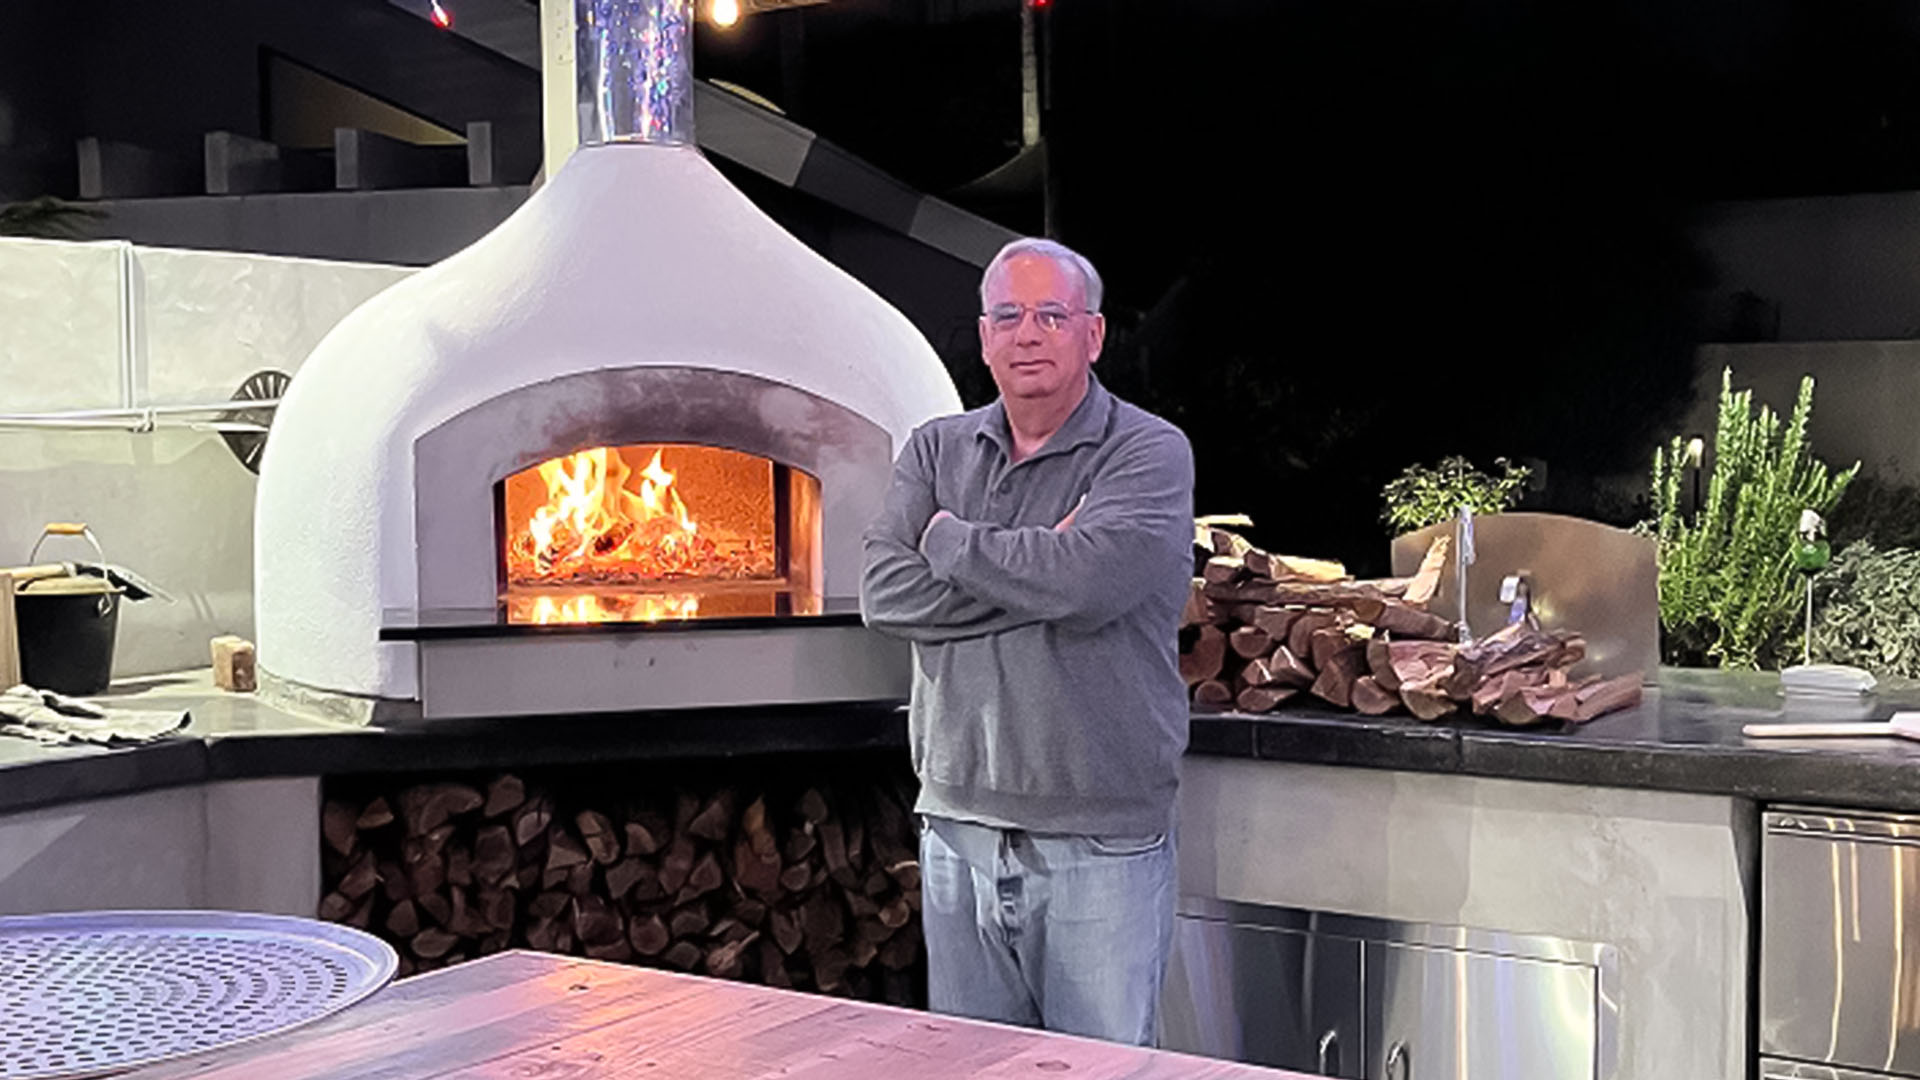 From Pizza Stone to Outdoor Pizza Oven